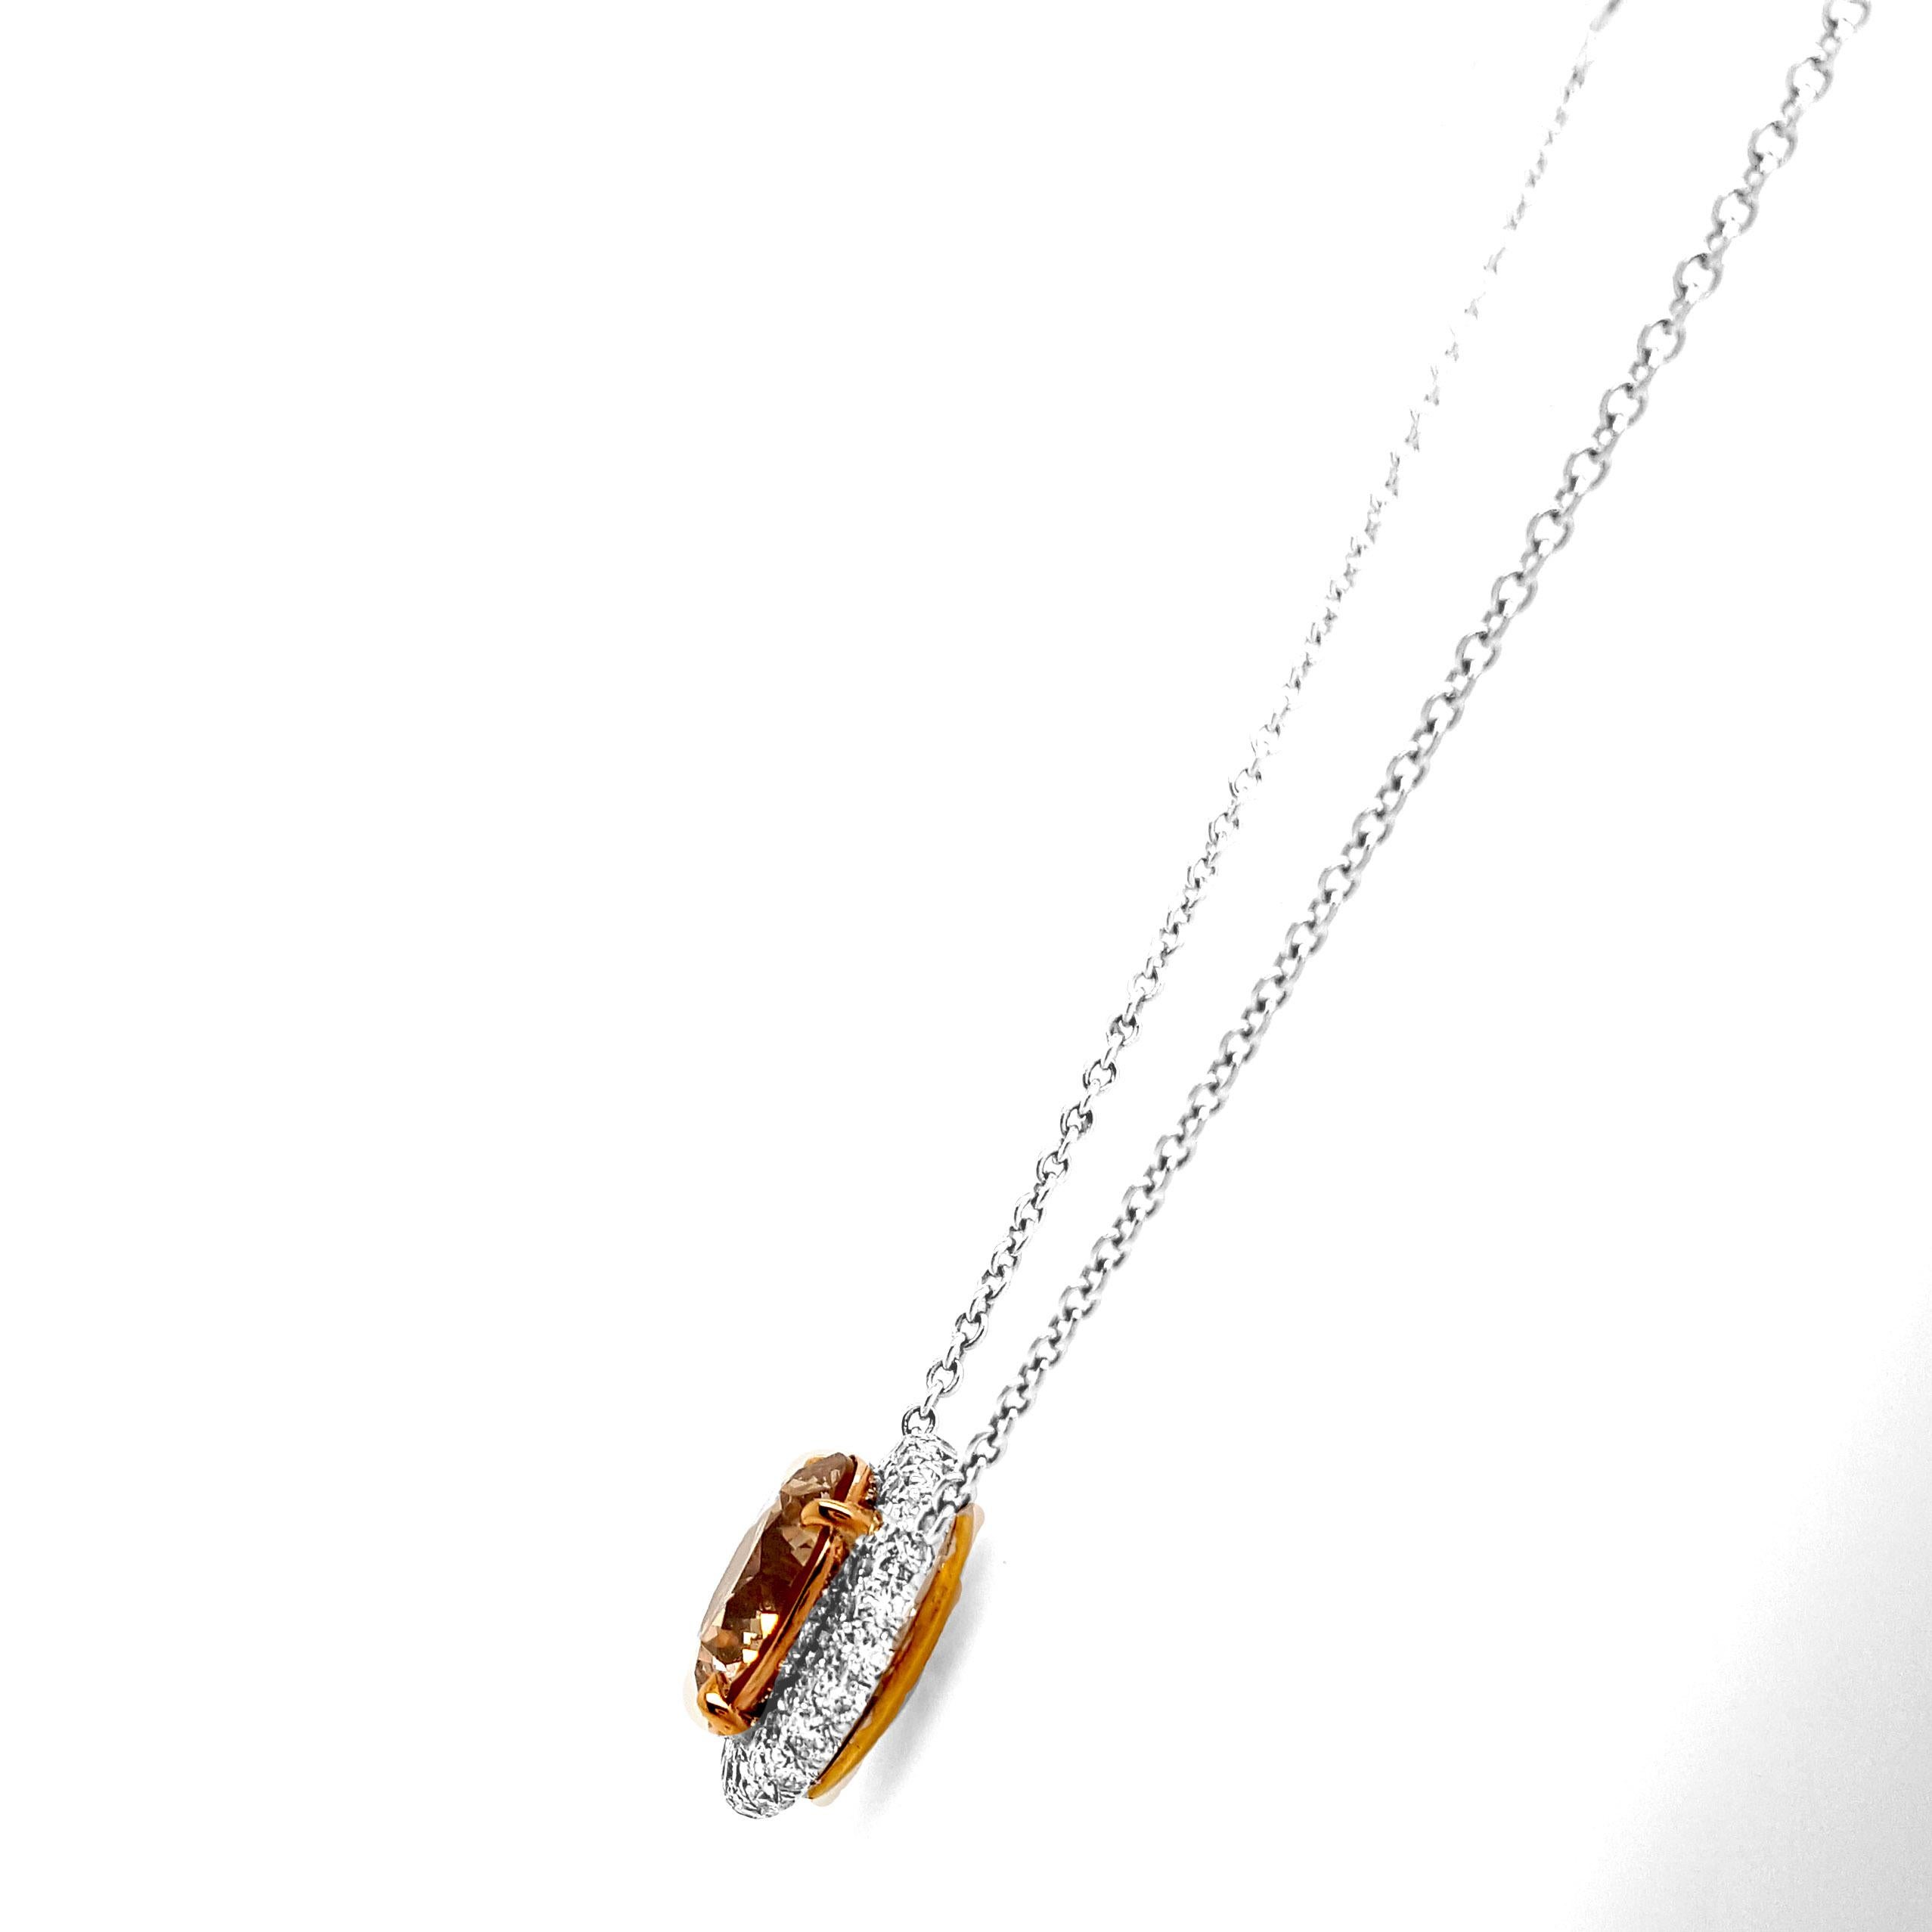 Contemporary 2.53 Carat Round Brilliant Brown Diamond Halo Pendant Necklace, Set in 18K Gold. For Sale